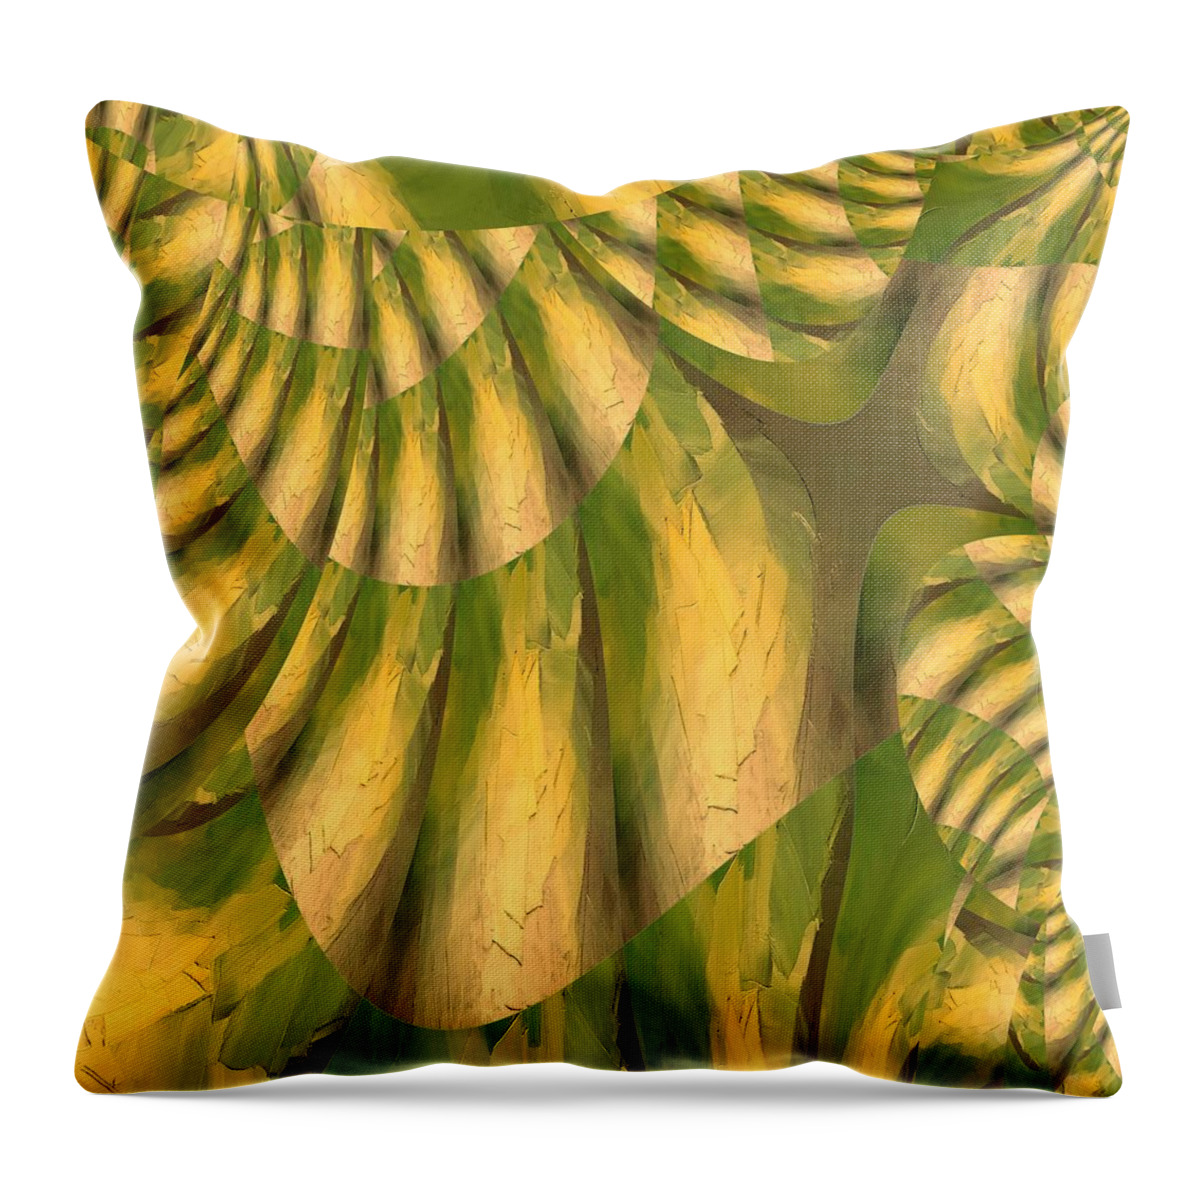 Oifii Throw Pillow featuring the digital art Green Tree Python Geometry by Stephane Poirier